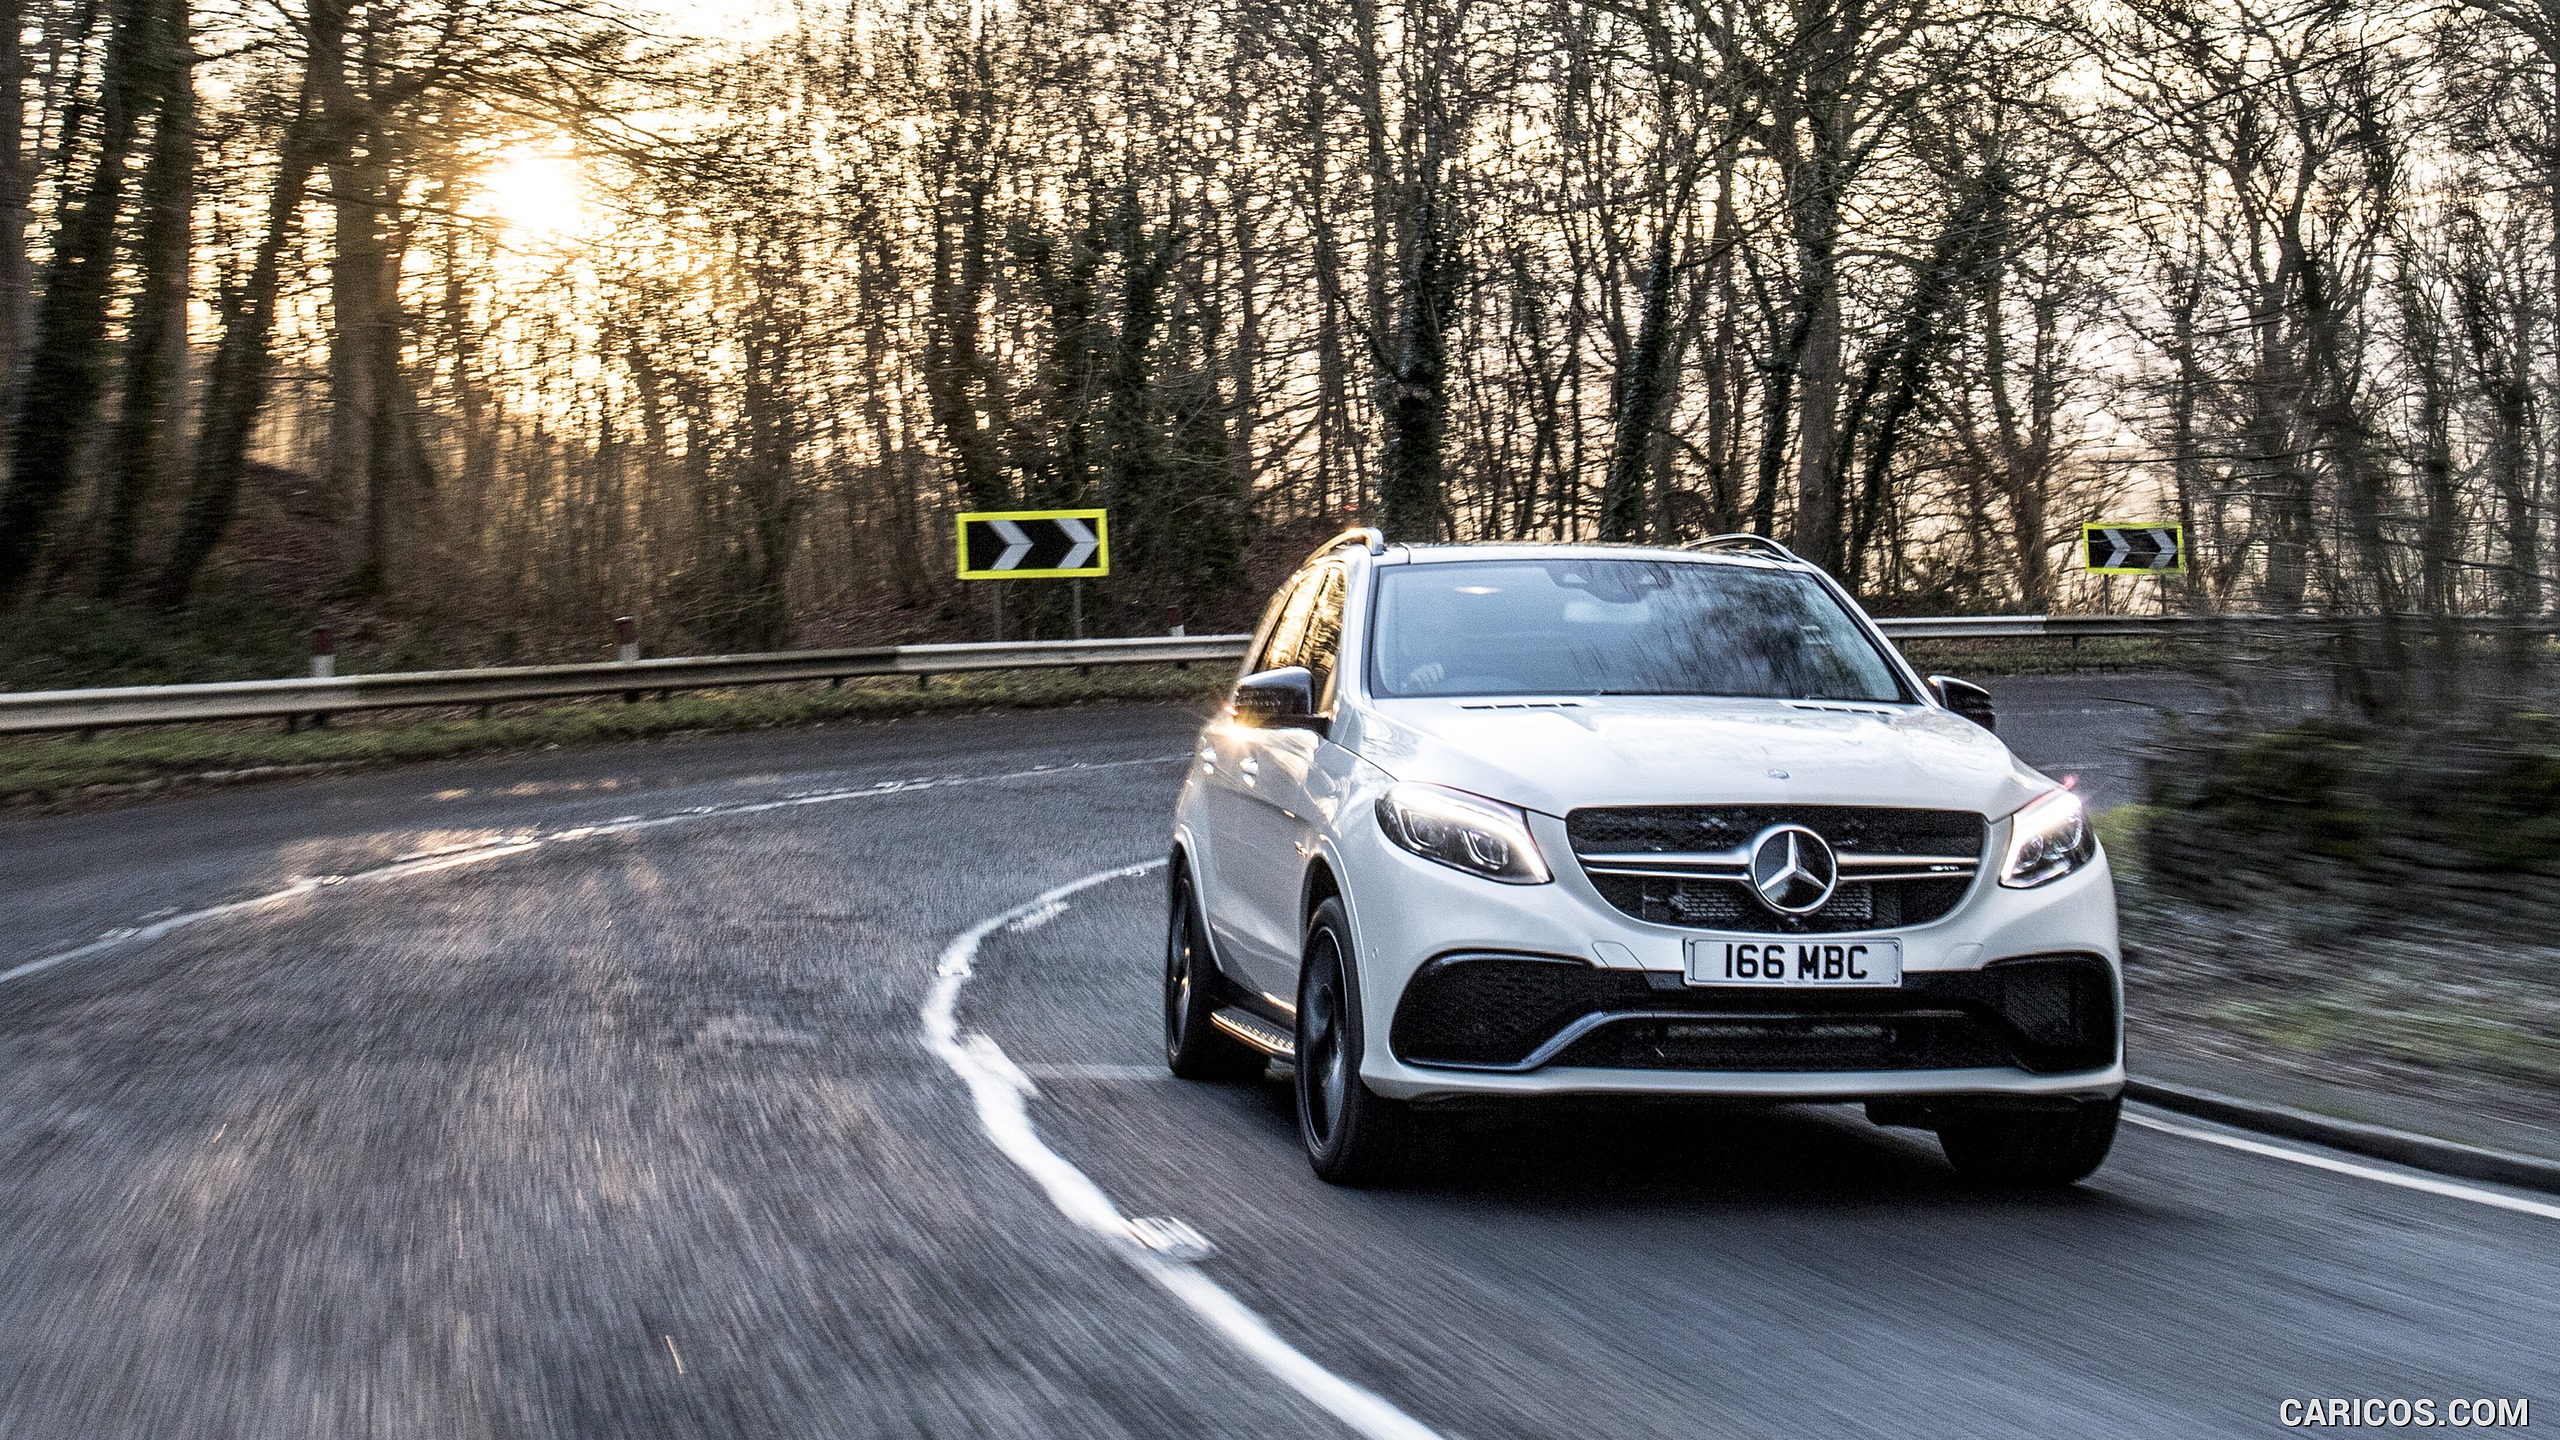 2016 Mercedes-AMG GLE 63 S (UK-Spec) - Front, #45 of 68